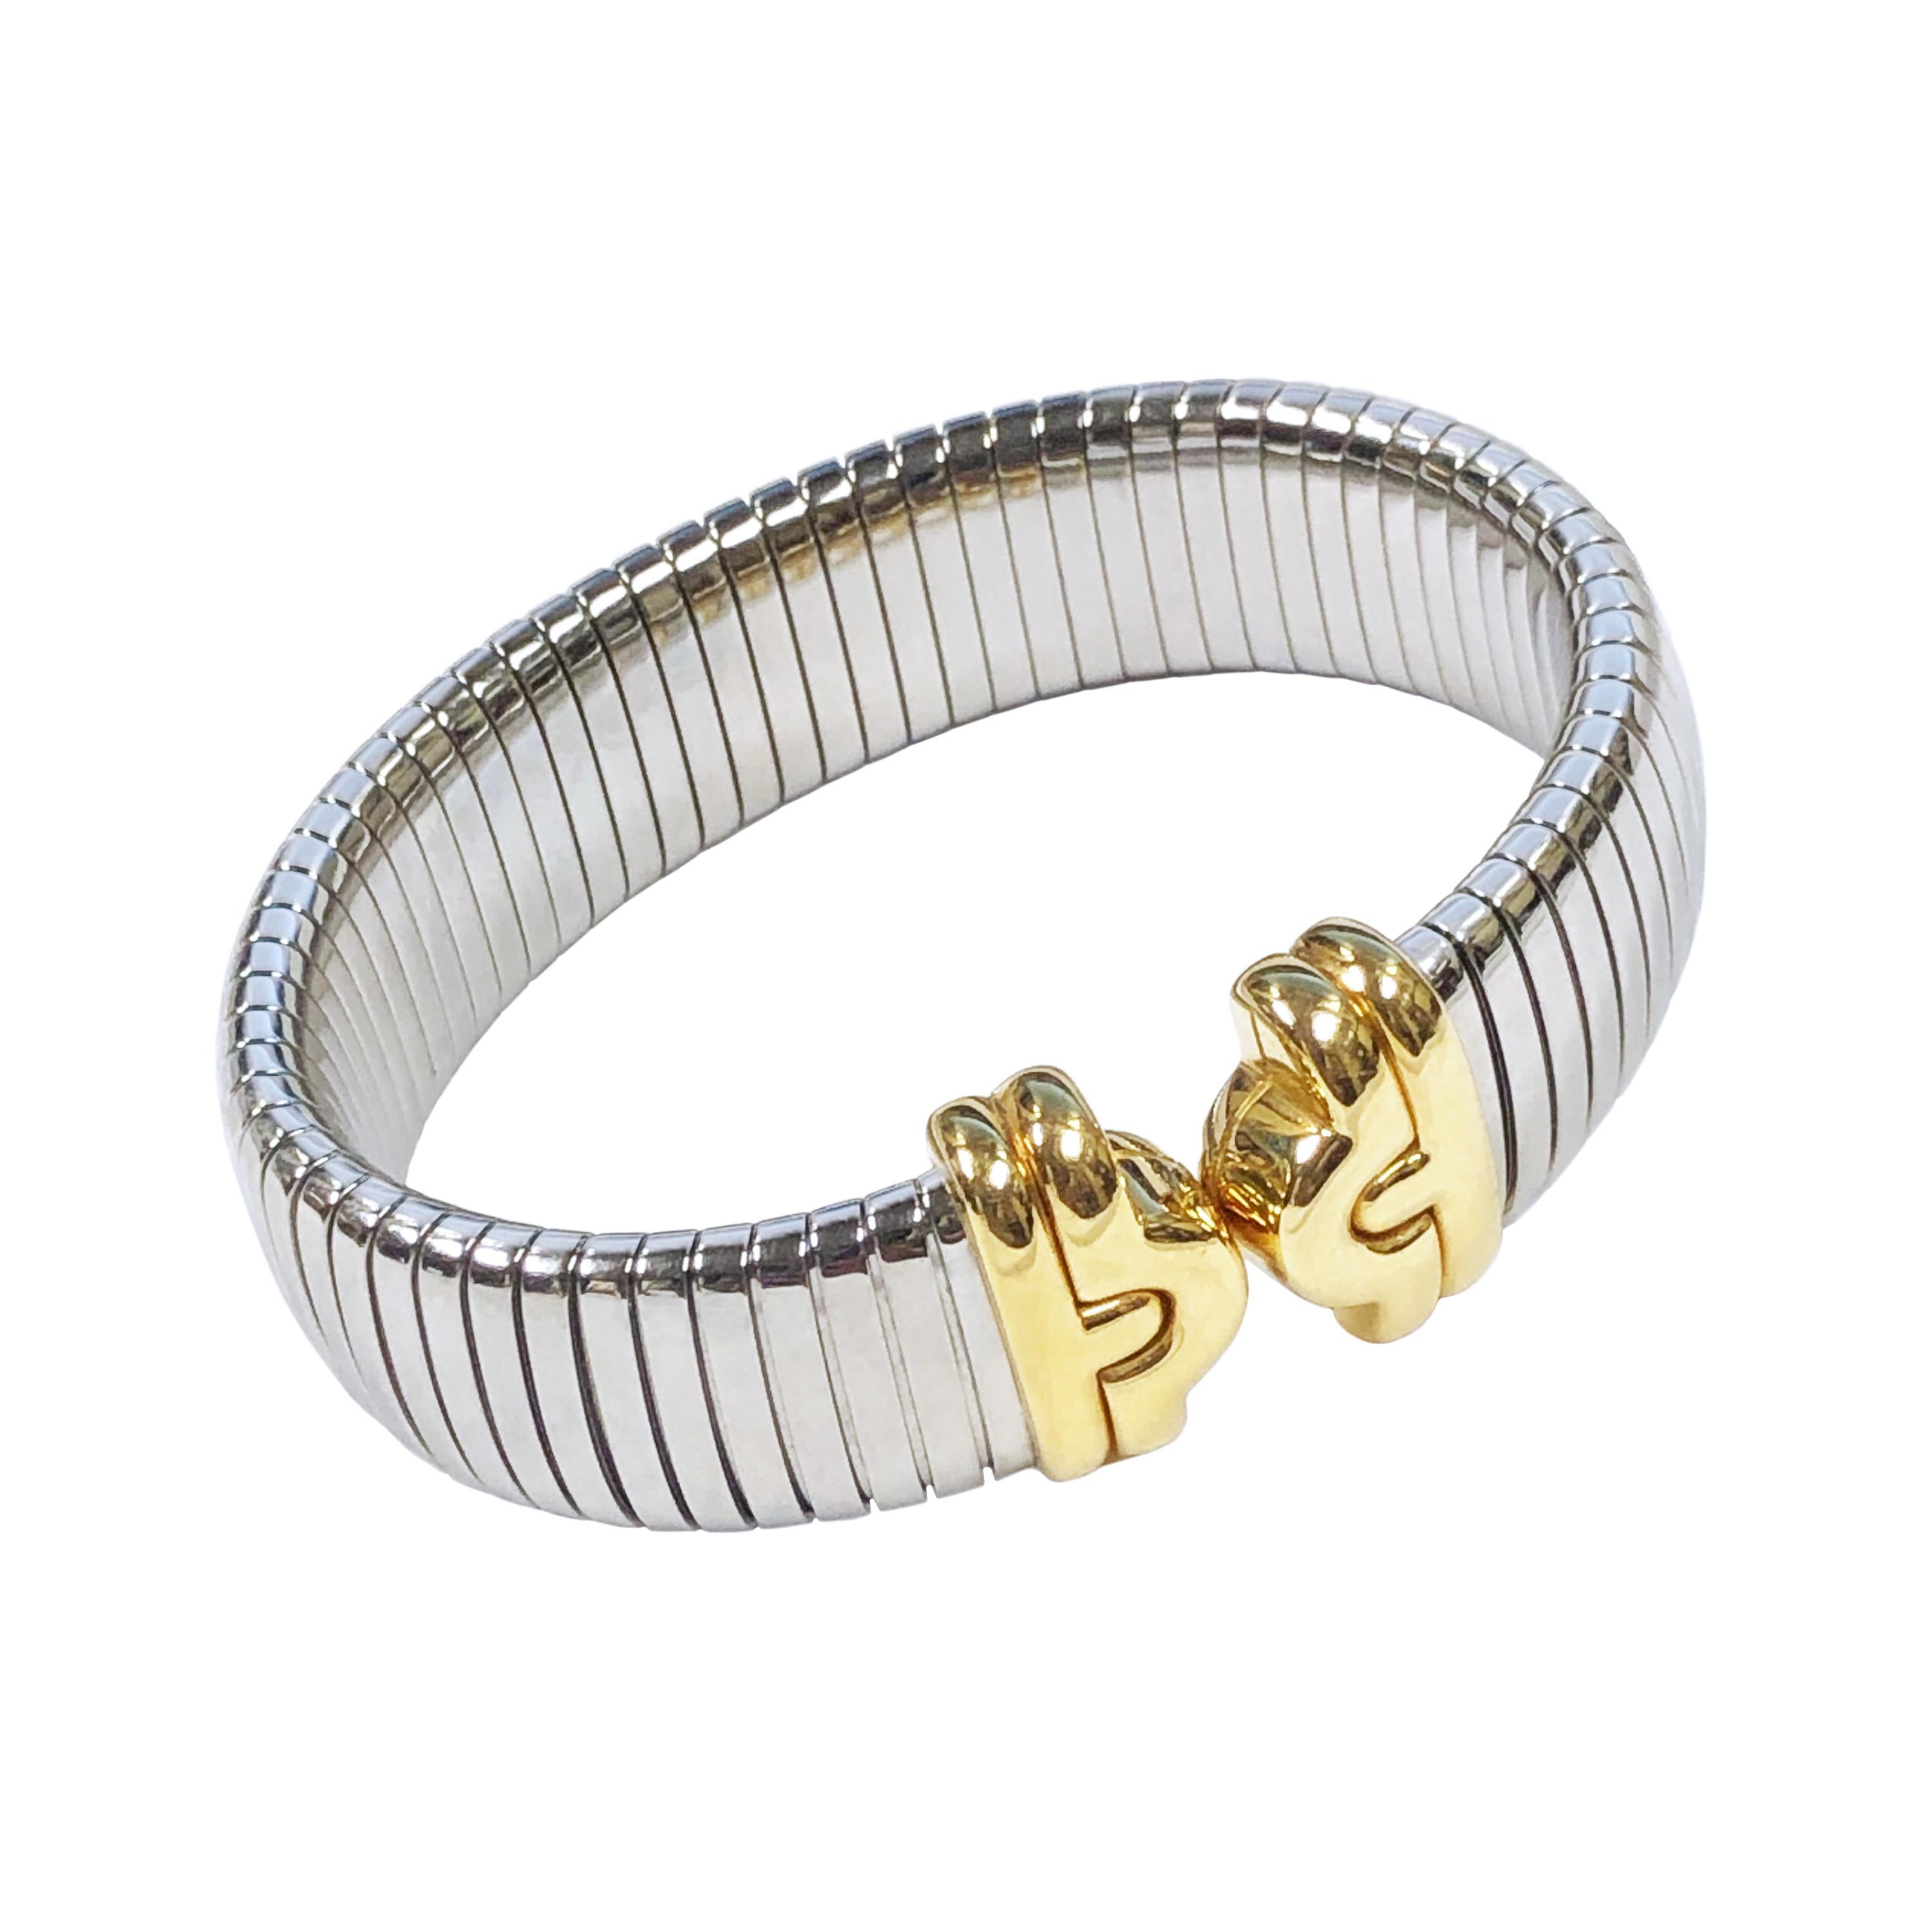 Circa 2010 Bulgari Tubogas collection Steel and 18K yellow Gold Cuff Bracelet, high polished flexible steel measuring 5/8 inch wide and 3/16 inch thick. 6 inches inside measurement and will flex to fit up to a 7 inch wrist.  